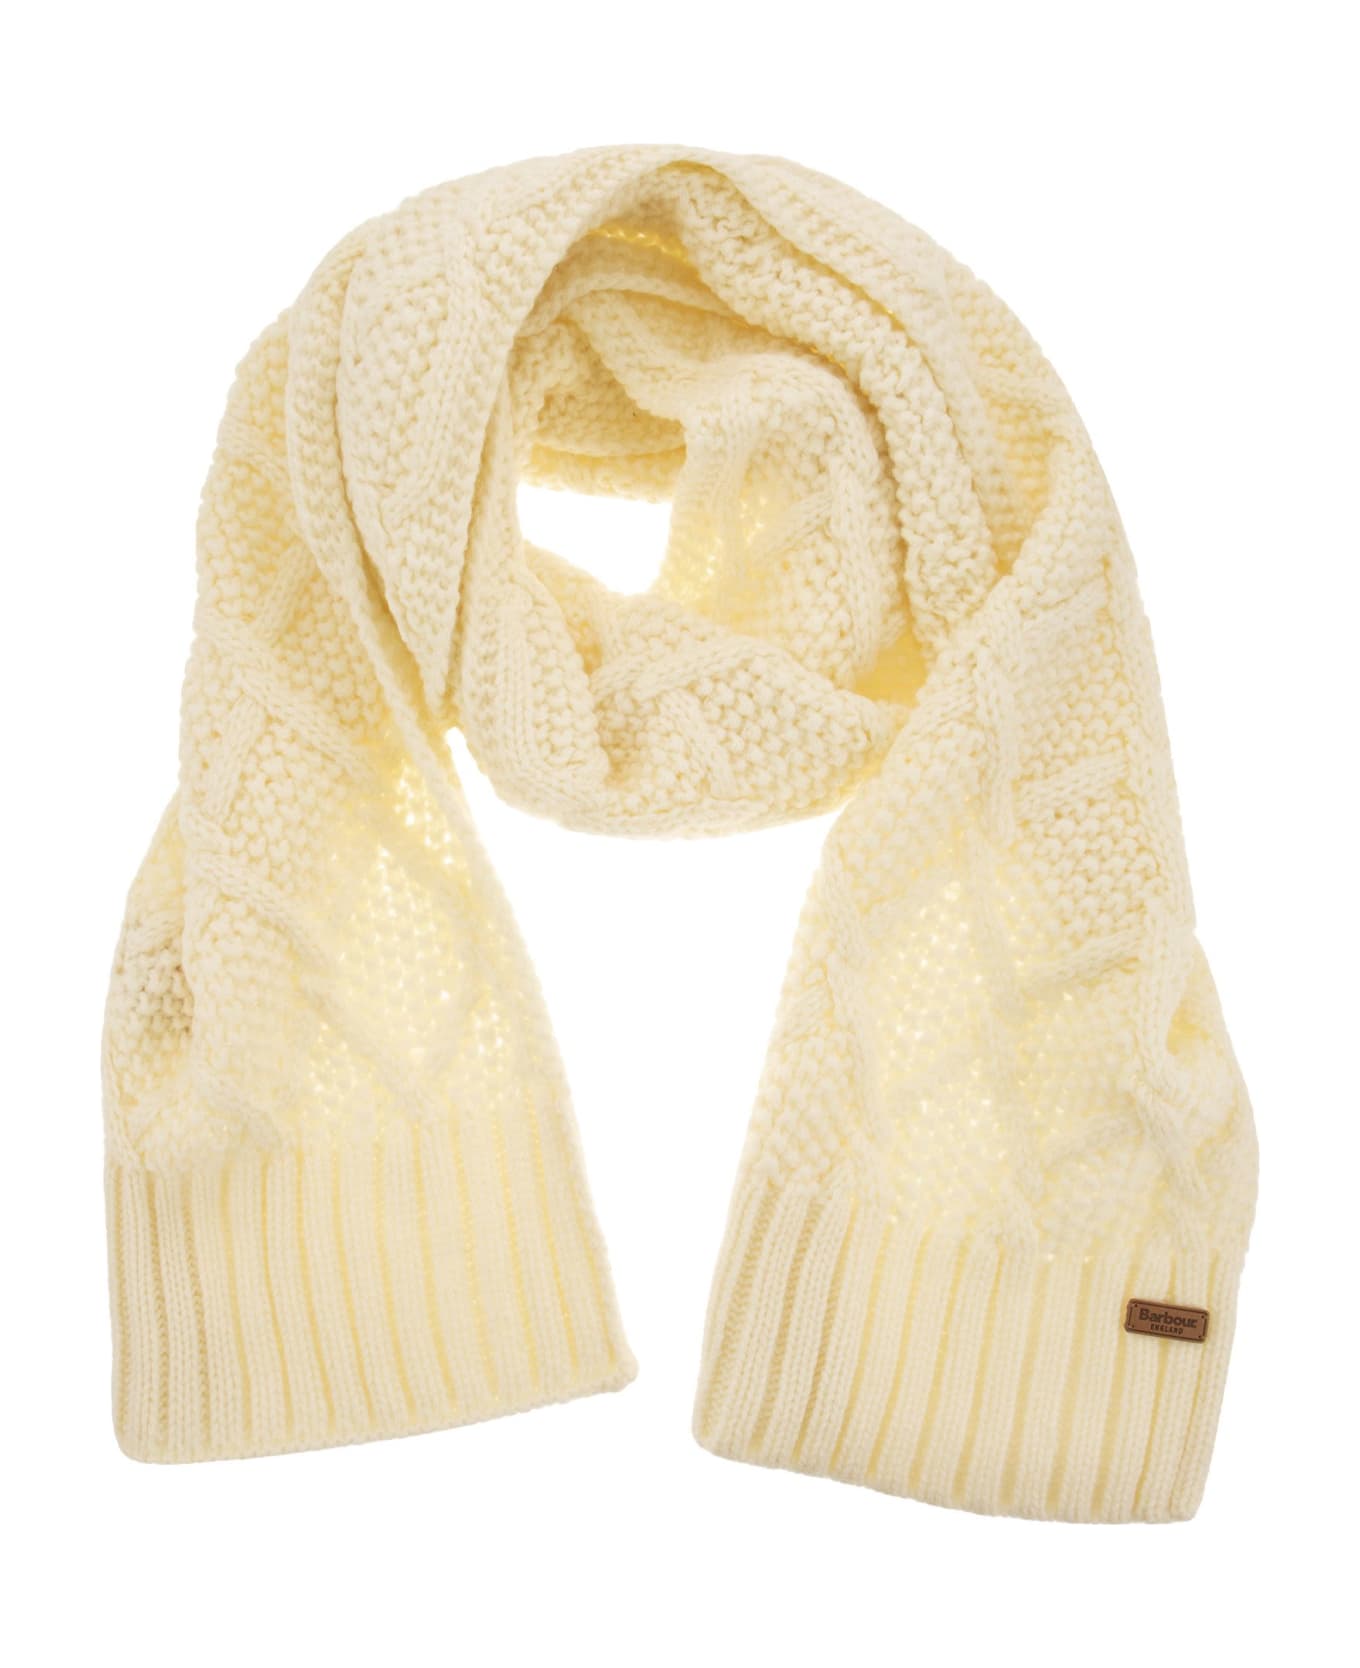 Barbour Ridley Cap And Scarf Set - Cream スカーフ＆ストール